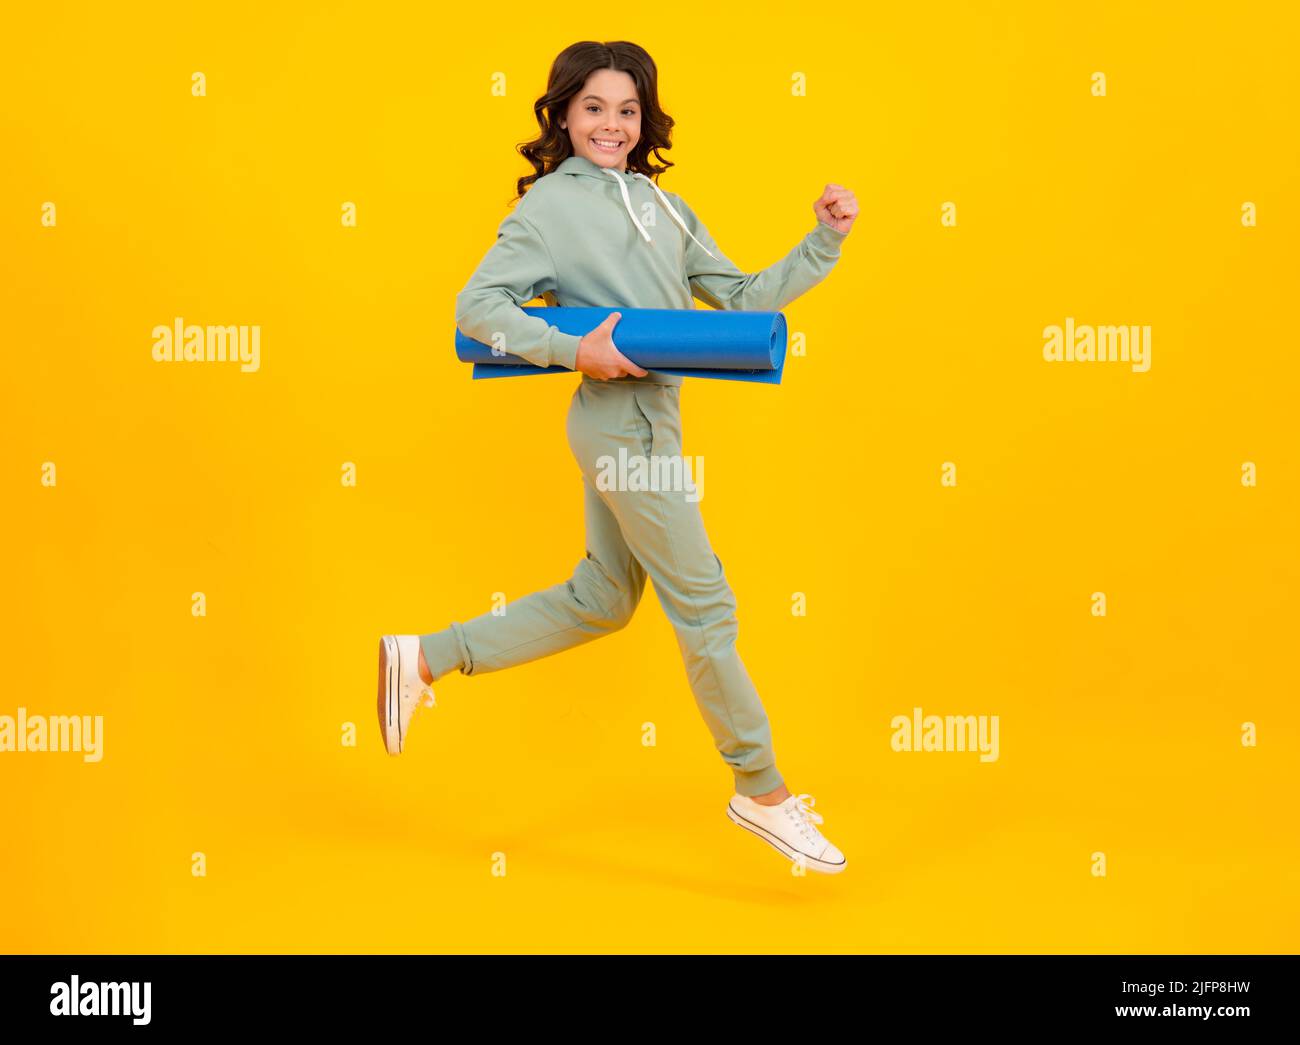 Sportswear advertising concept. Run and jump. Teenager child girl in tracksuits jogging suit posing in the studio hold fitness mat. Stock Photo